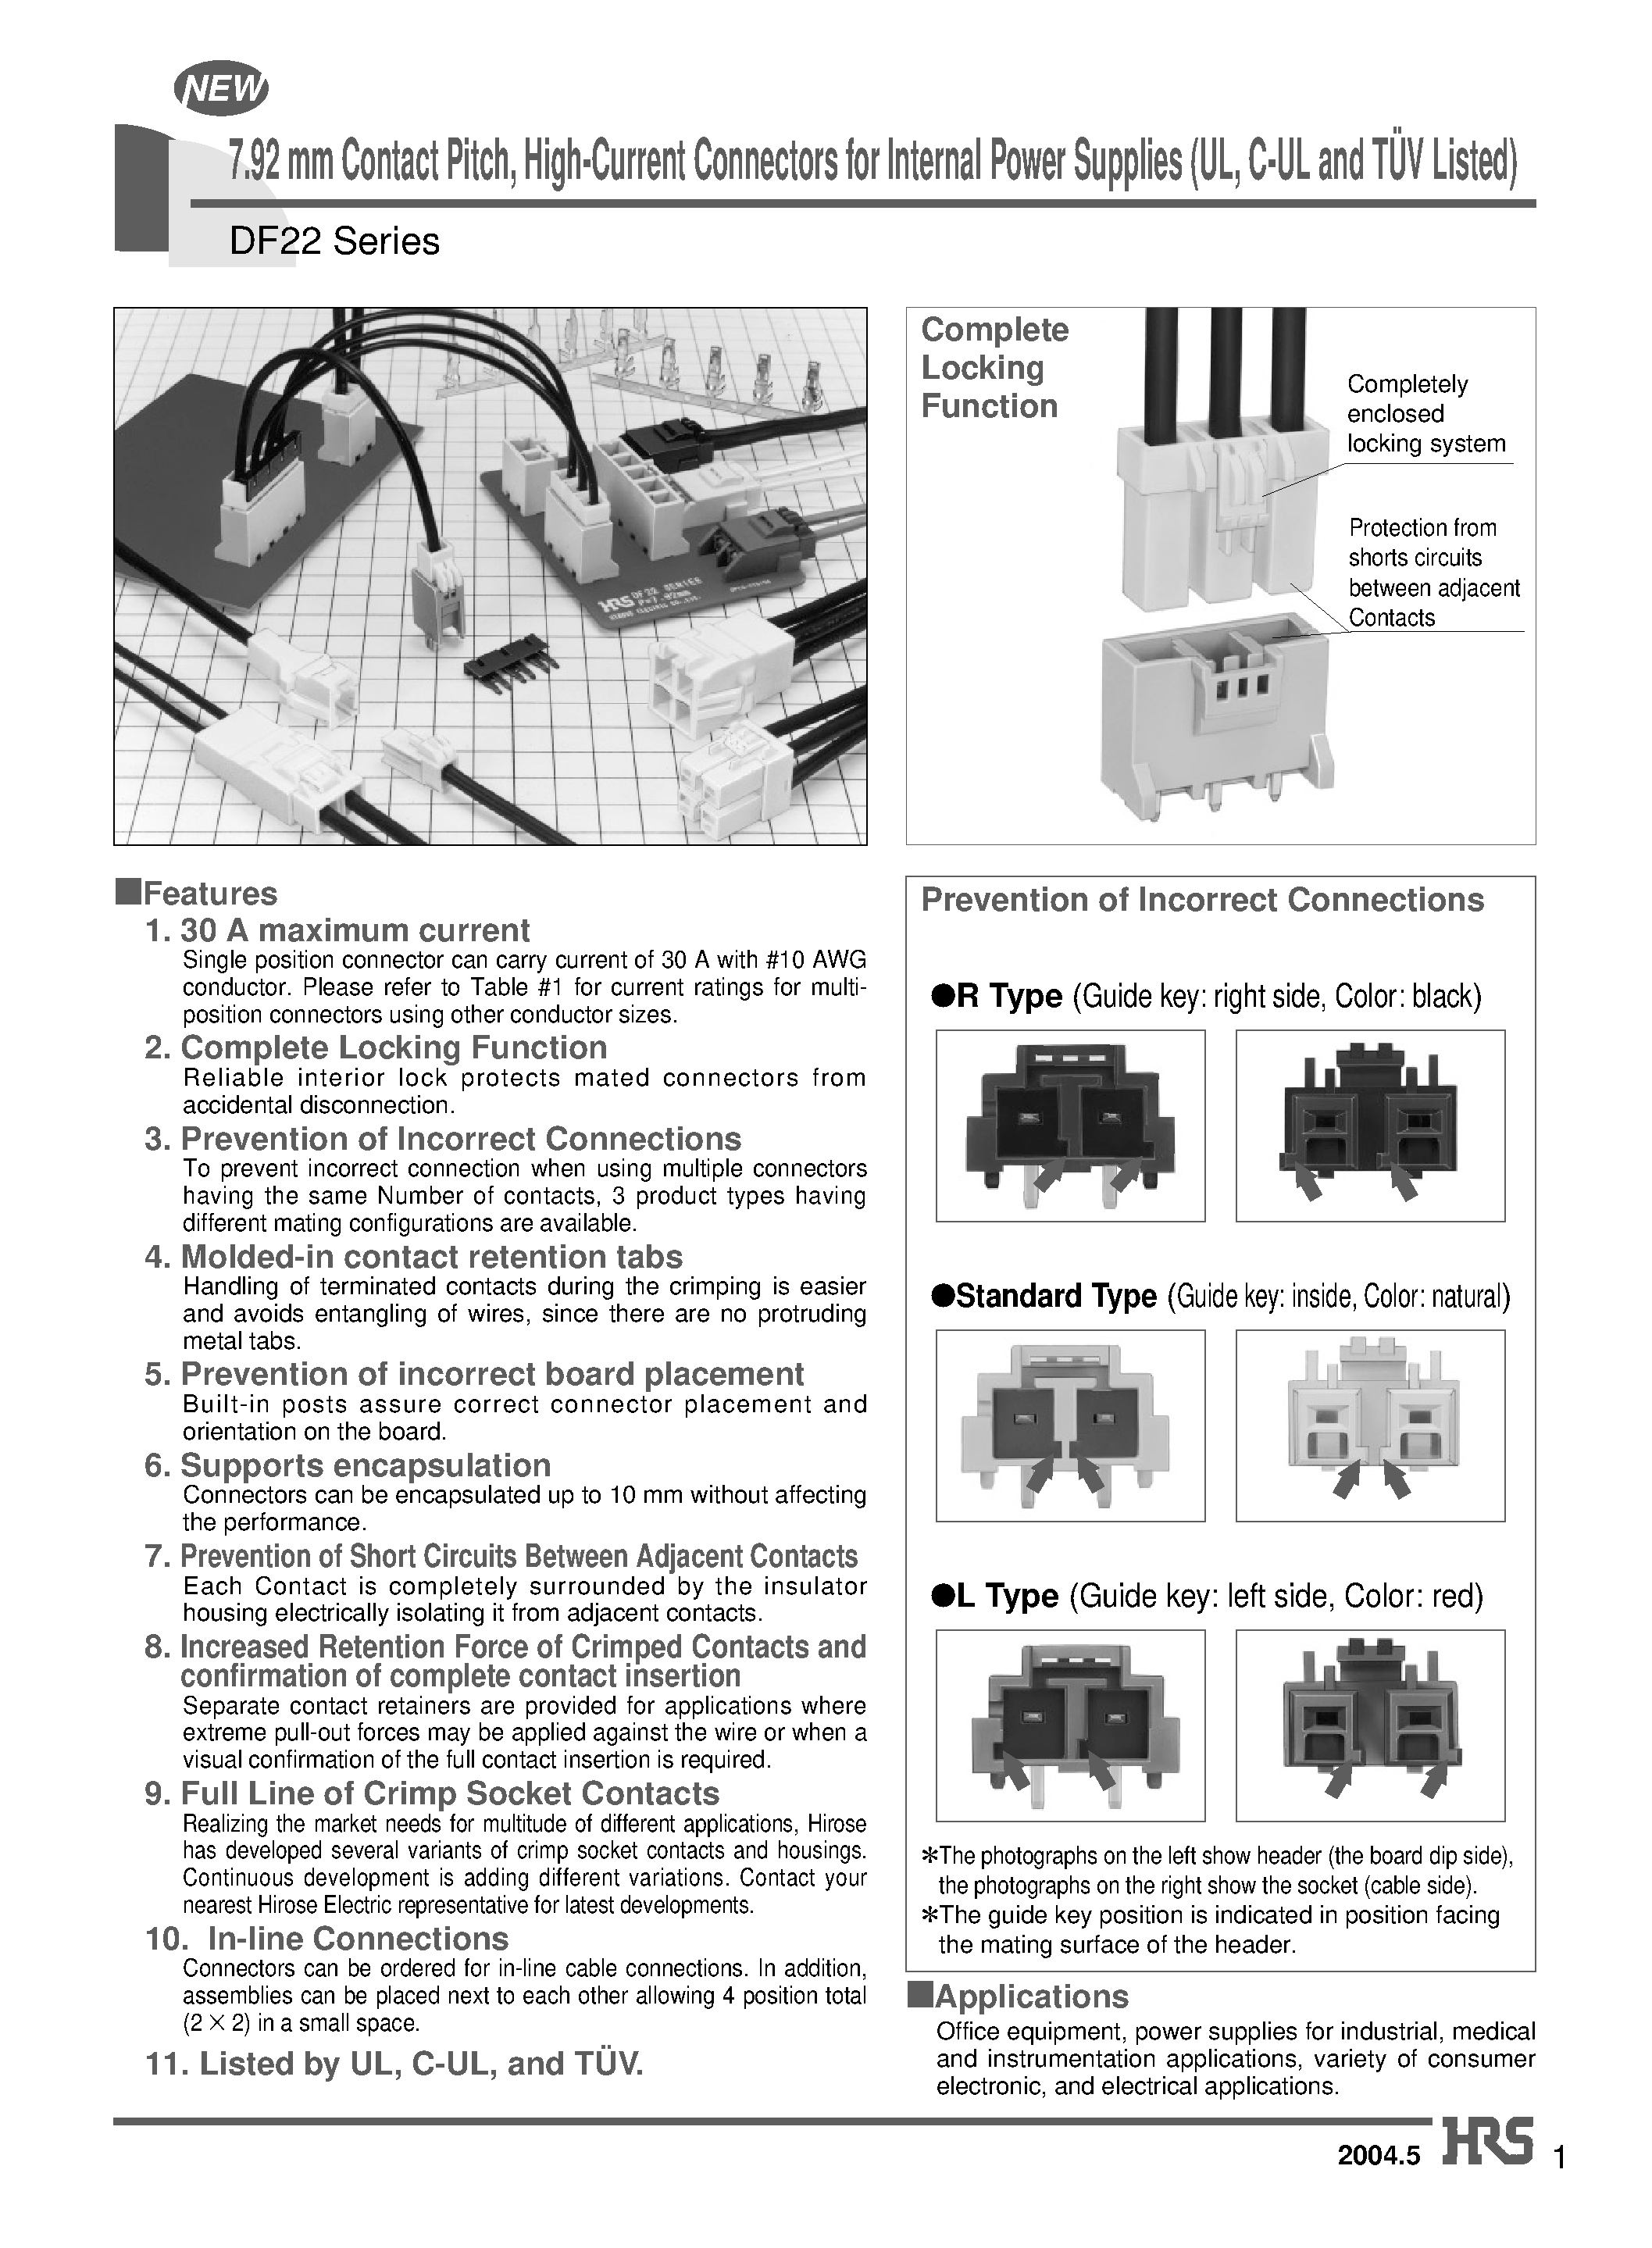 Datasheet DF22-4P-7.92C - 7.92 mm Contact Pitch/ High-Current Connectors for Internal Power Supplies (UL/ C-UL and TUV Listed) page 1